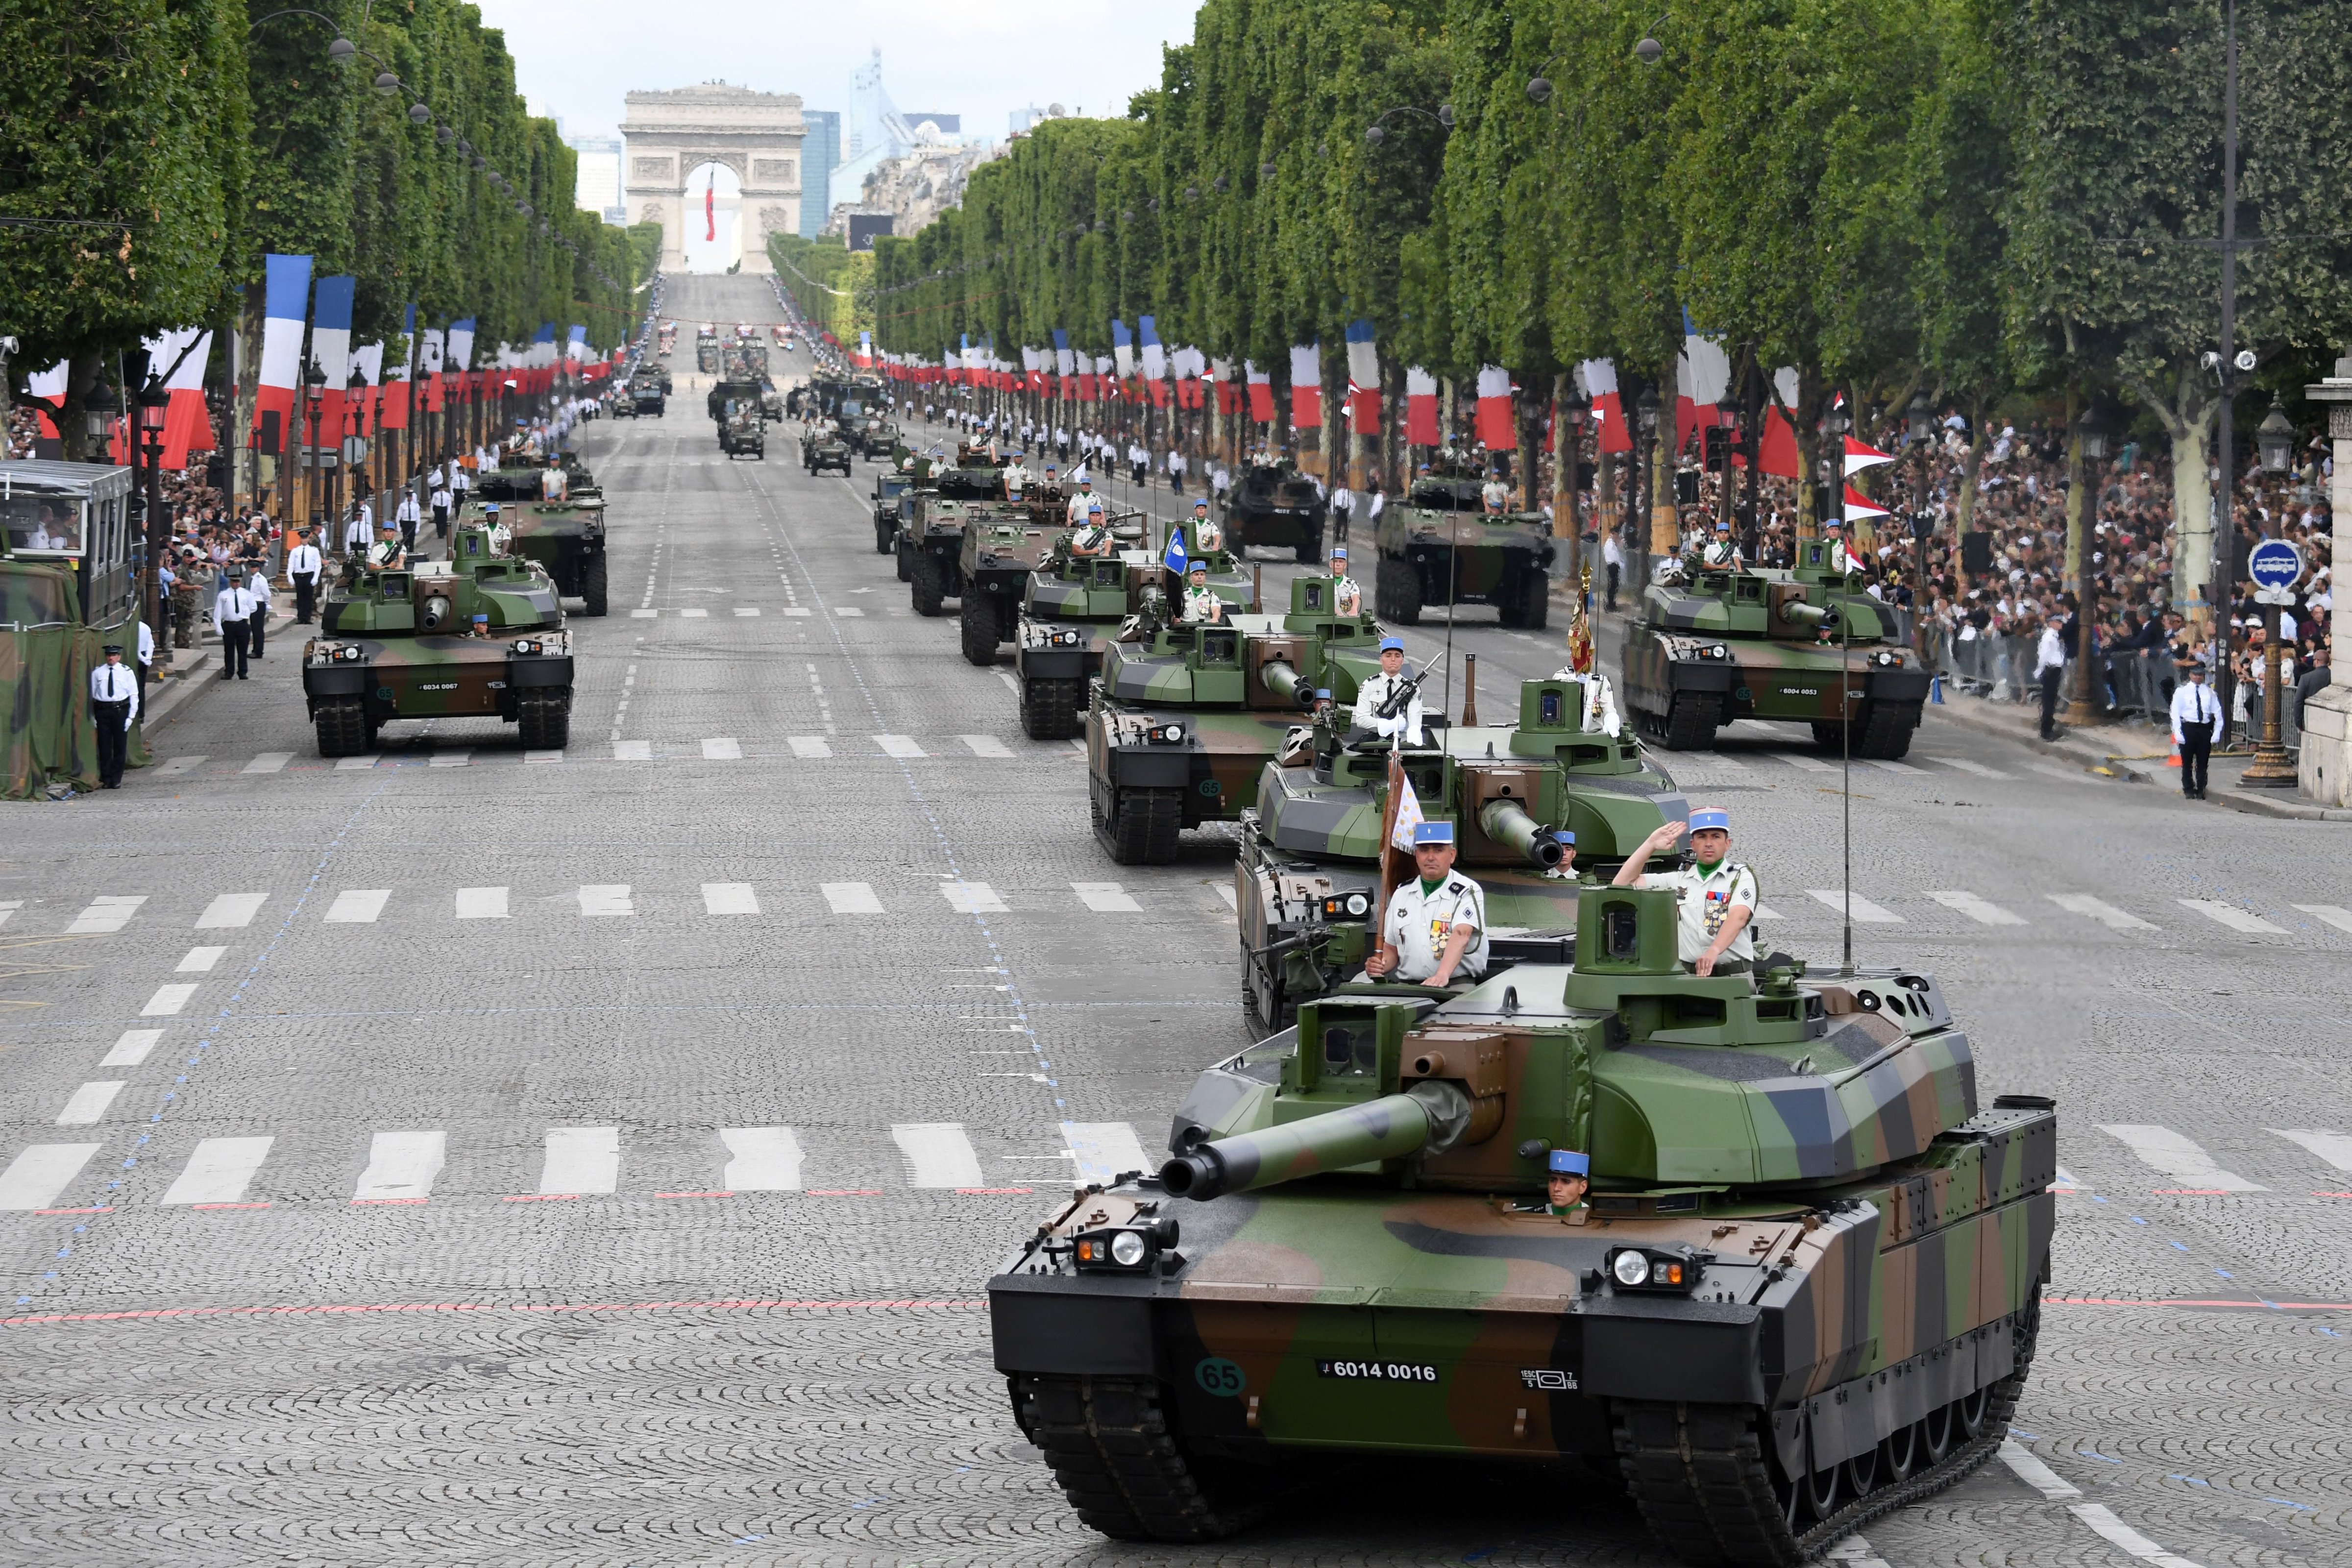 Members of the 5e Regiment de Dragons (5th Dragoon Regiment) parade on Leclerc tanks during the annual Bastille Day military parade on the Champs-Elysees avenue in Paris on July 14, 2017. (ALAIN JOCARD—AFP/Getty Images)